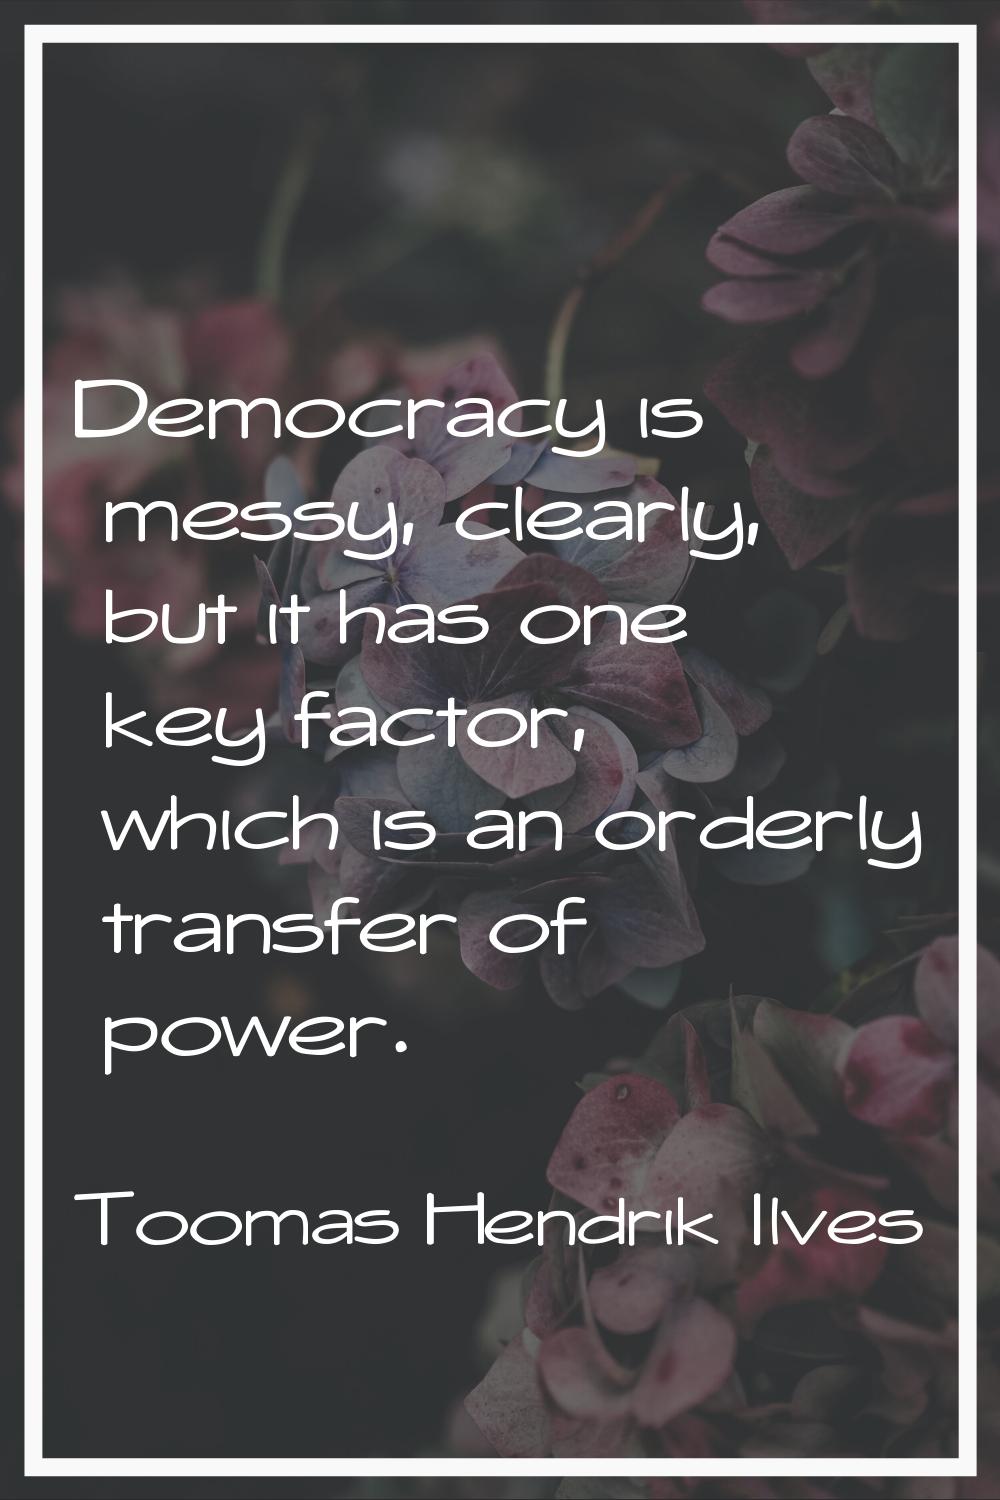 Democracy is messy, clearly, but it has one key factor, which is an orderly transfer of power.